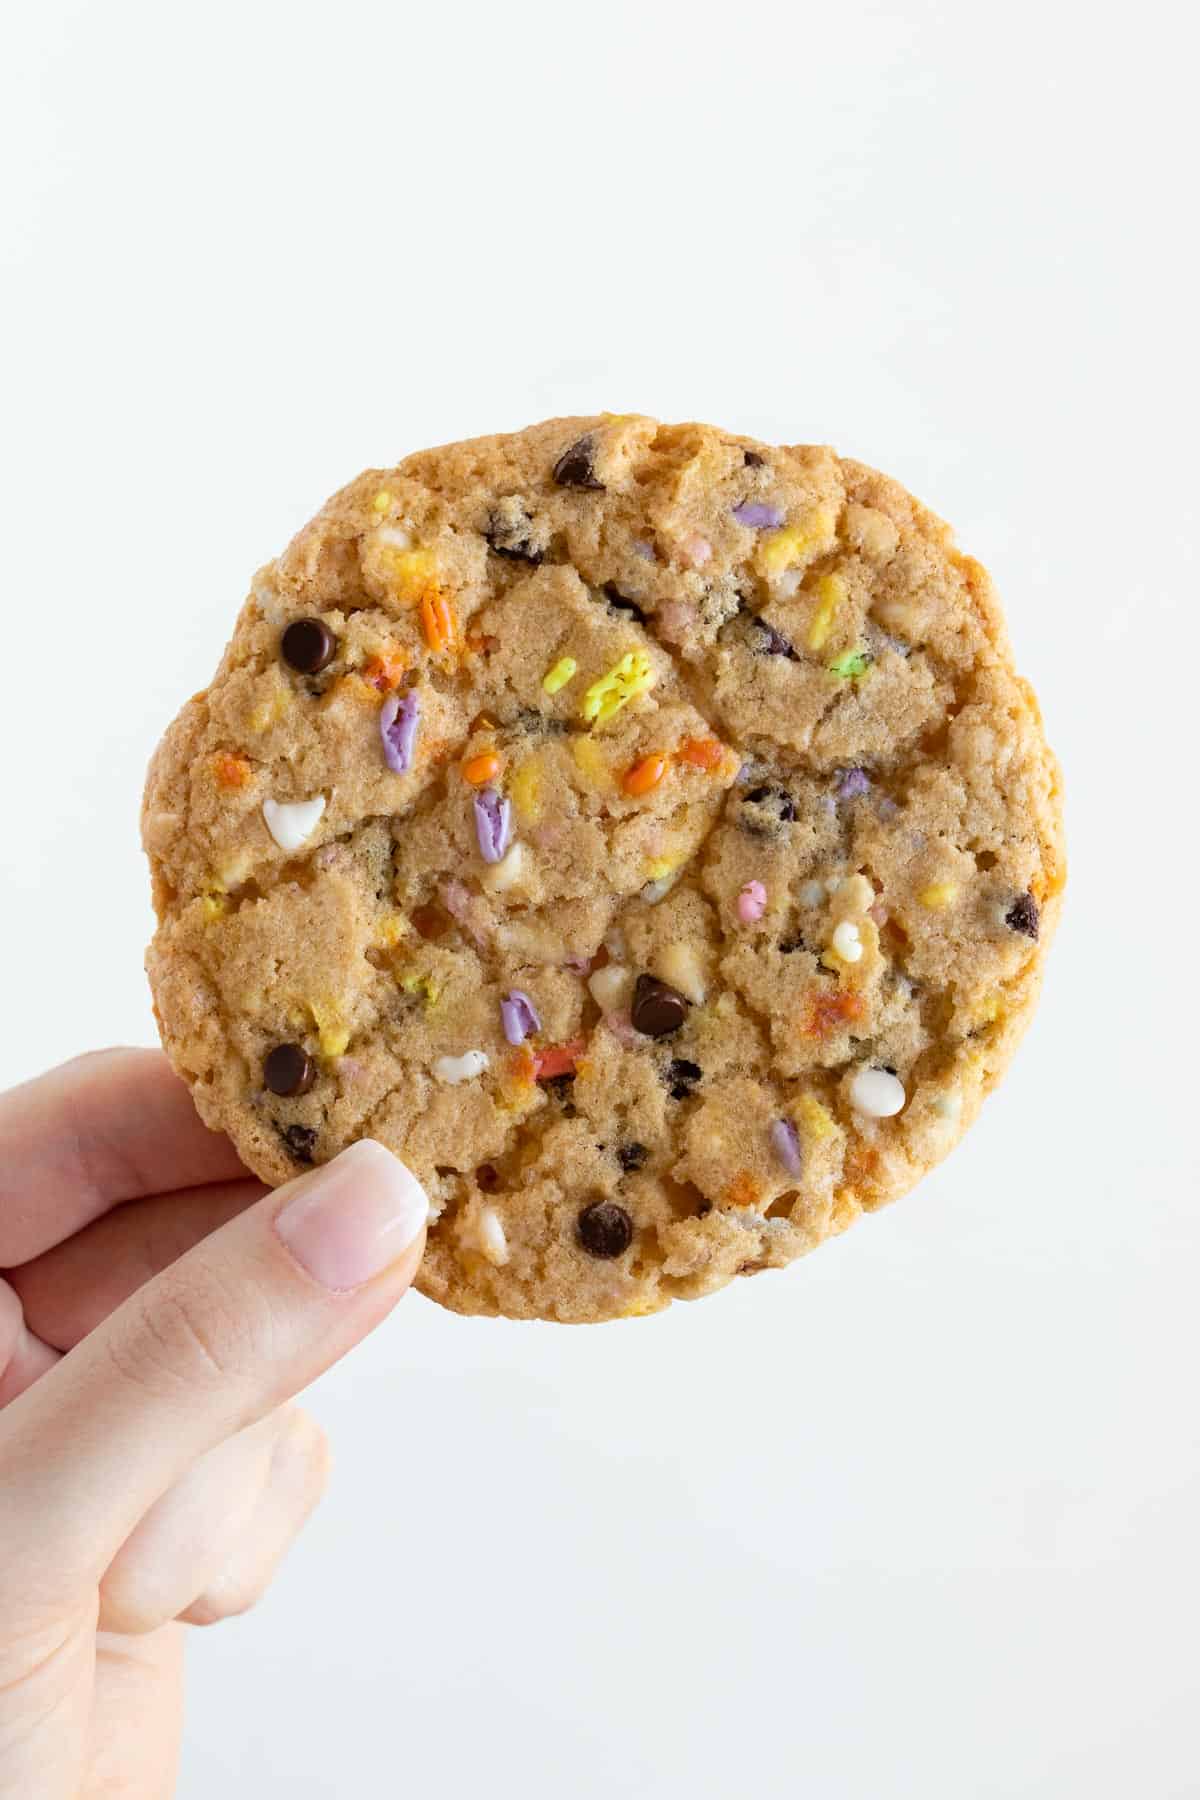 a hand holding a giant vegan birthday cake cookie with sprinkles, white chocolate chips, and chocolate chips